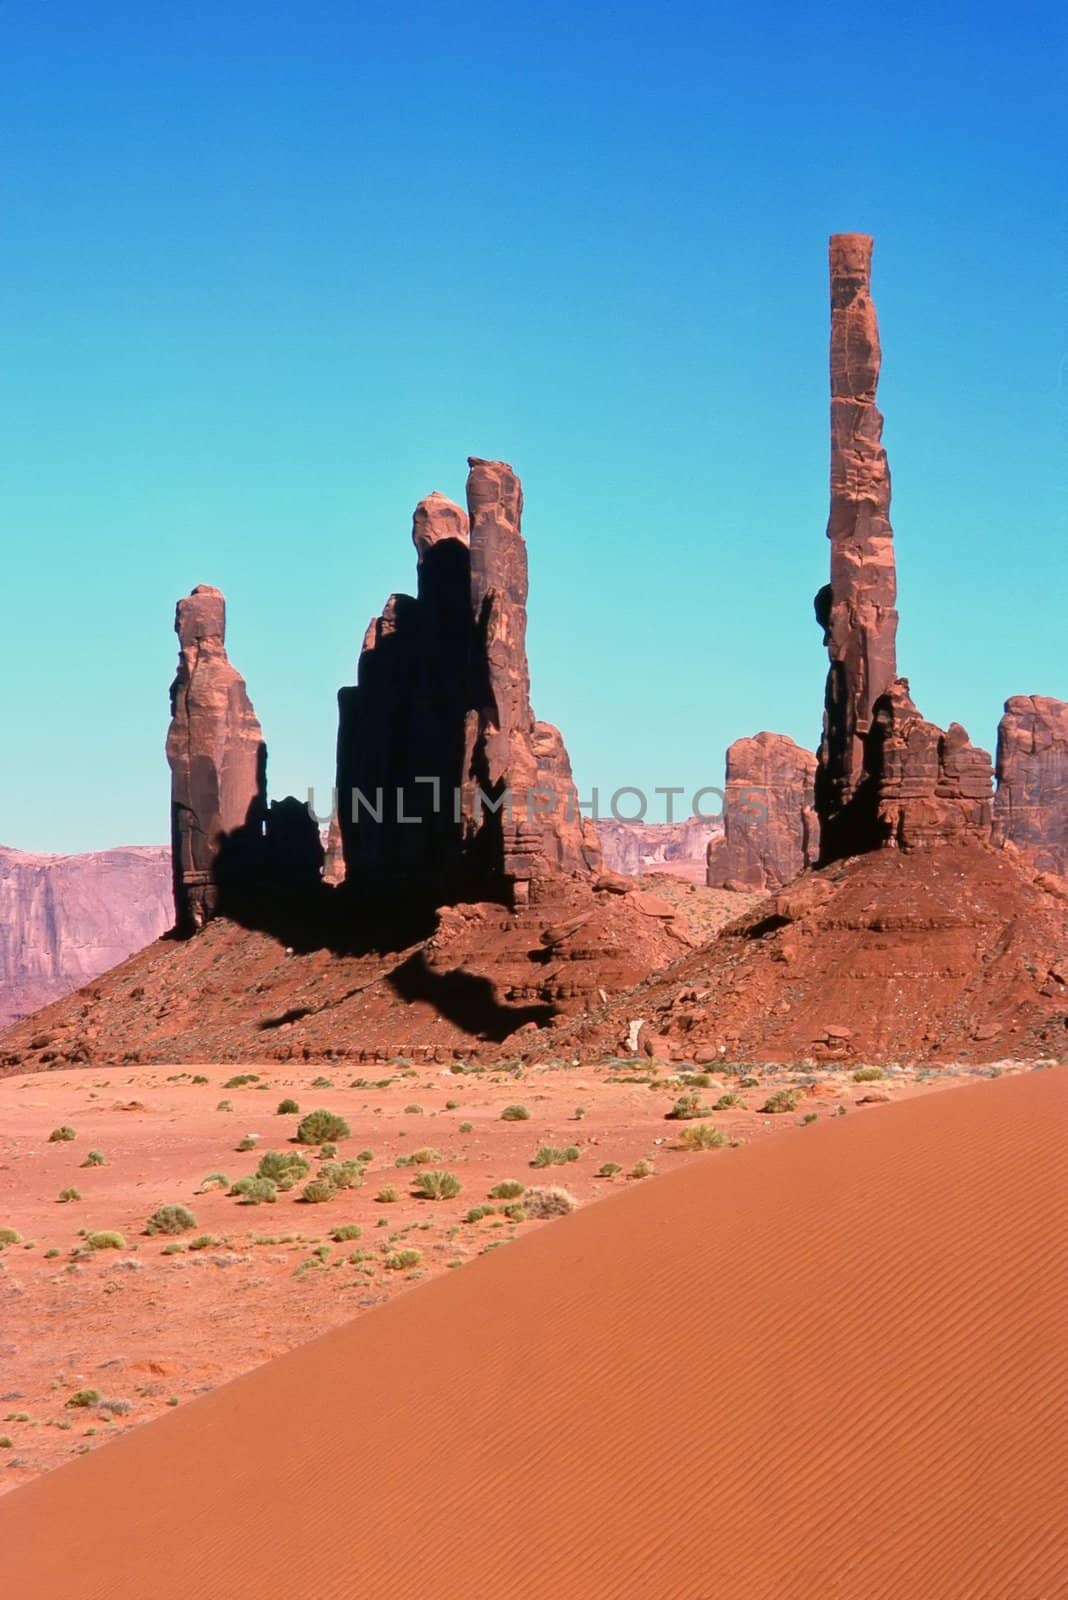 The Totem Pole, Monument Valley